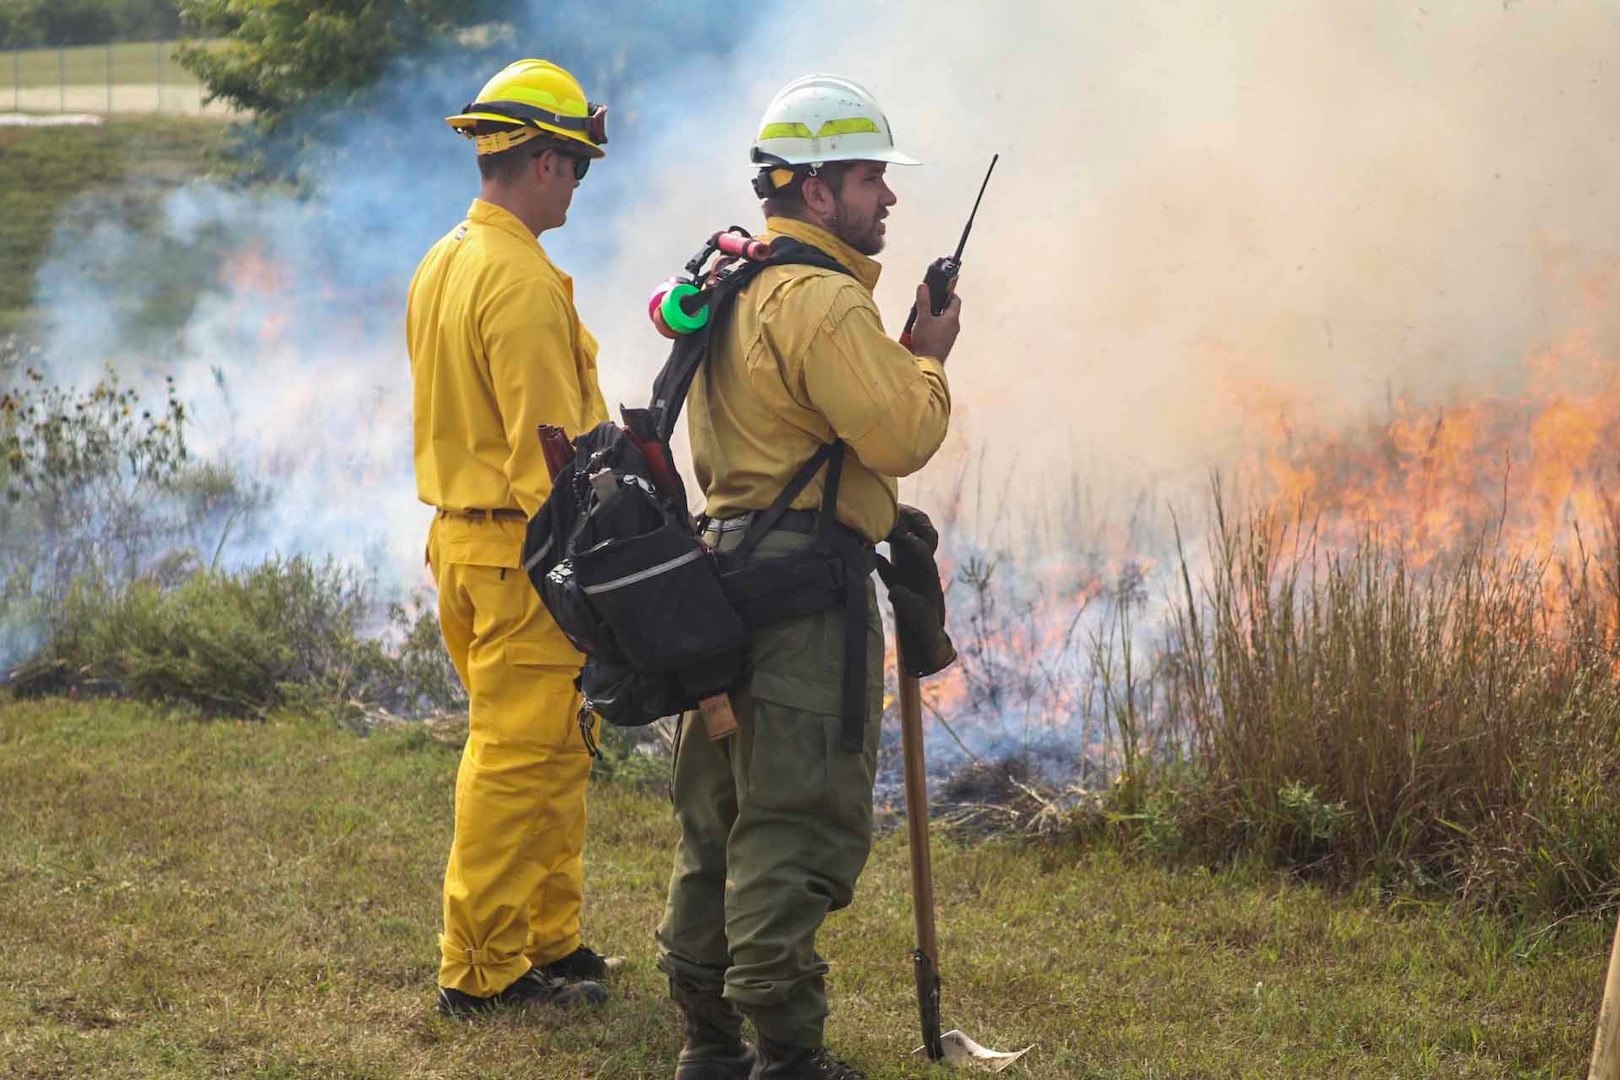 Chris Hanson, right, district fire management officer with the Kansas Forest Service, monitors a controlled burn with a Kansas National Guard student during the Wildland Firefighting Red Card Certification Course at the Great Plains Regional Training Center in Salina Sept. 17, 2020.